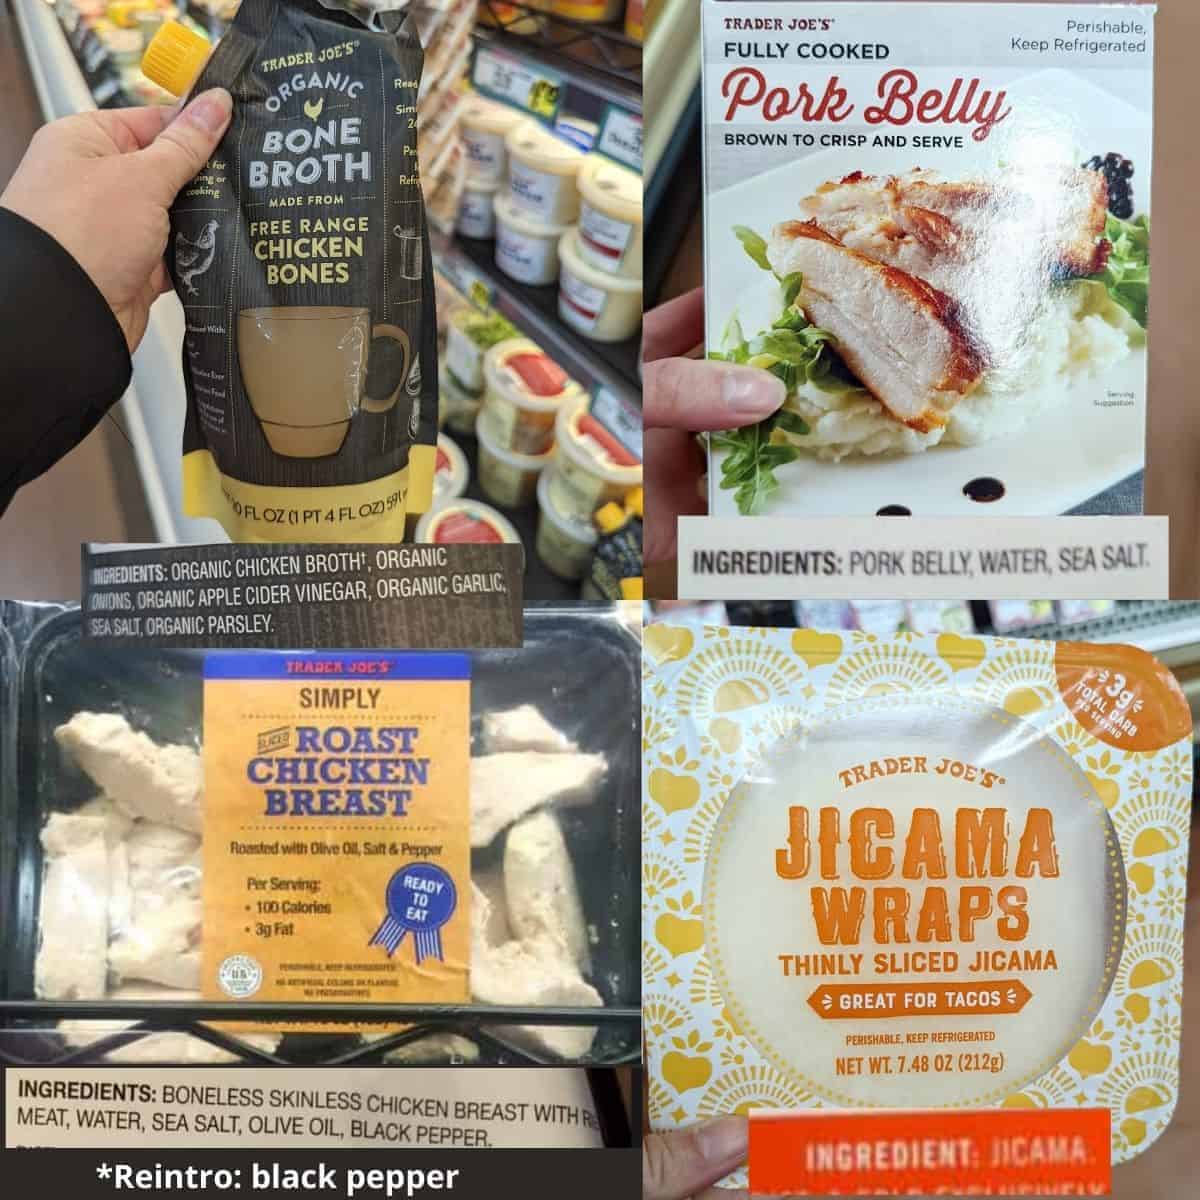 Trader Joes Bone Broth, pork belly, jicama wraps, and simply roast chicken breast with ingredient labels.